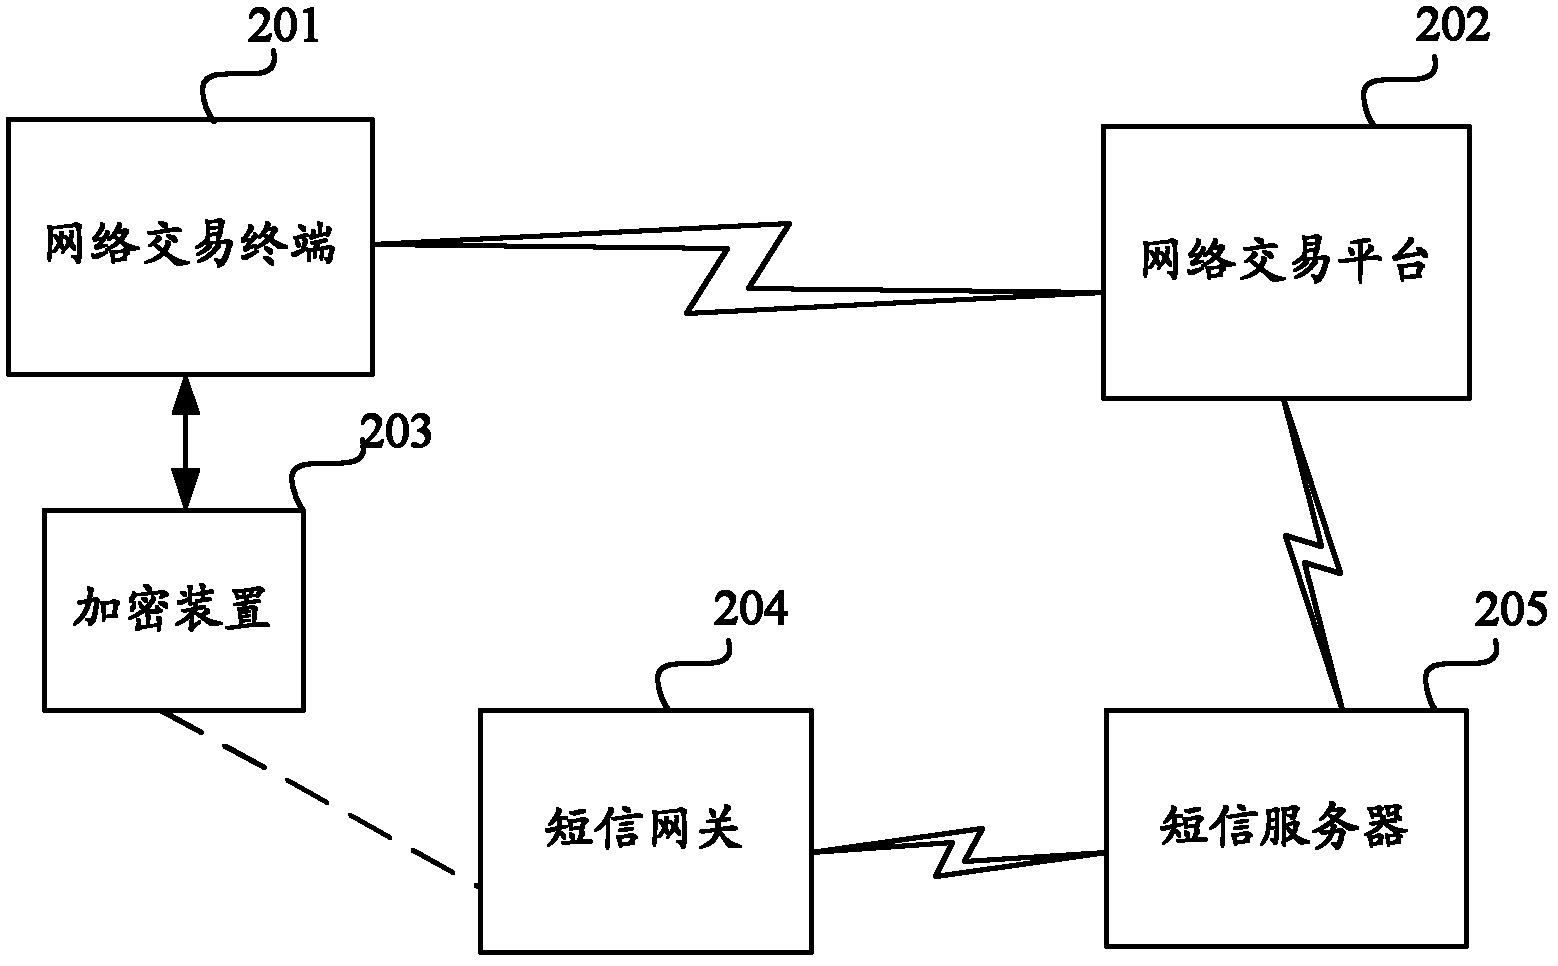 System and method for ensuring safety of network payment